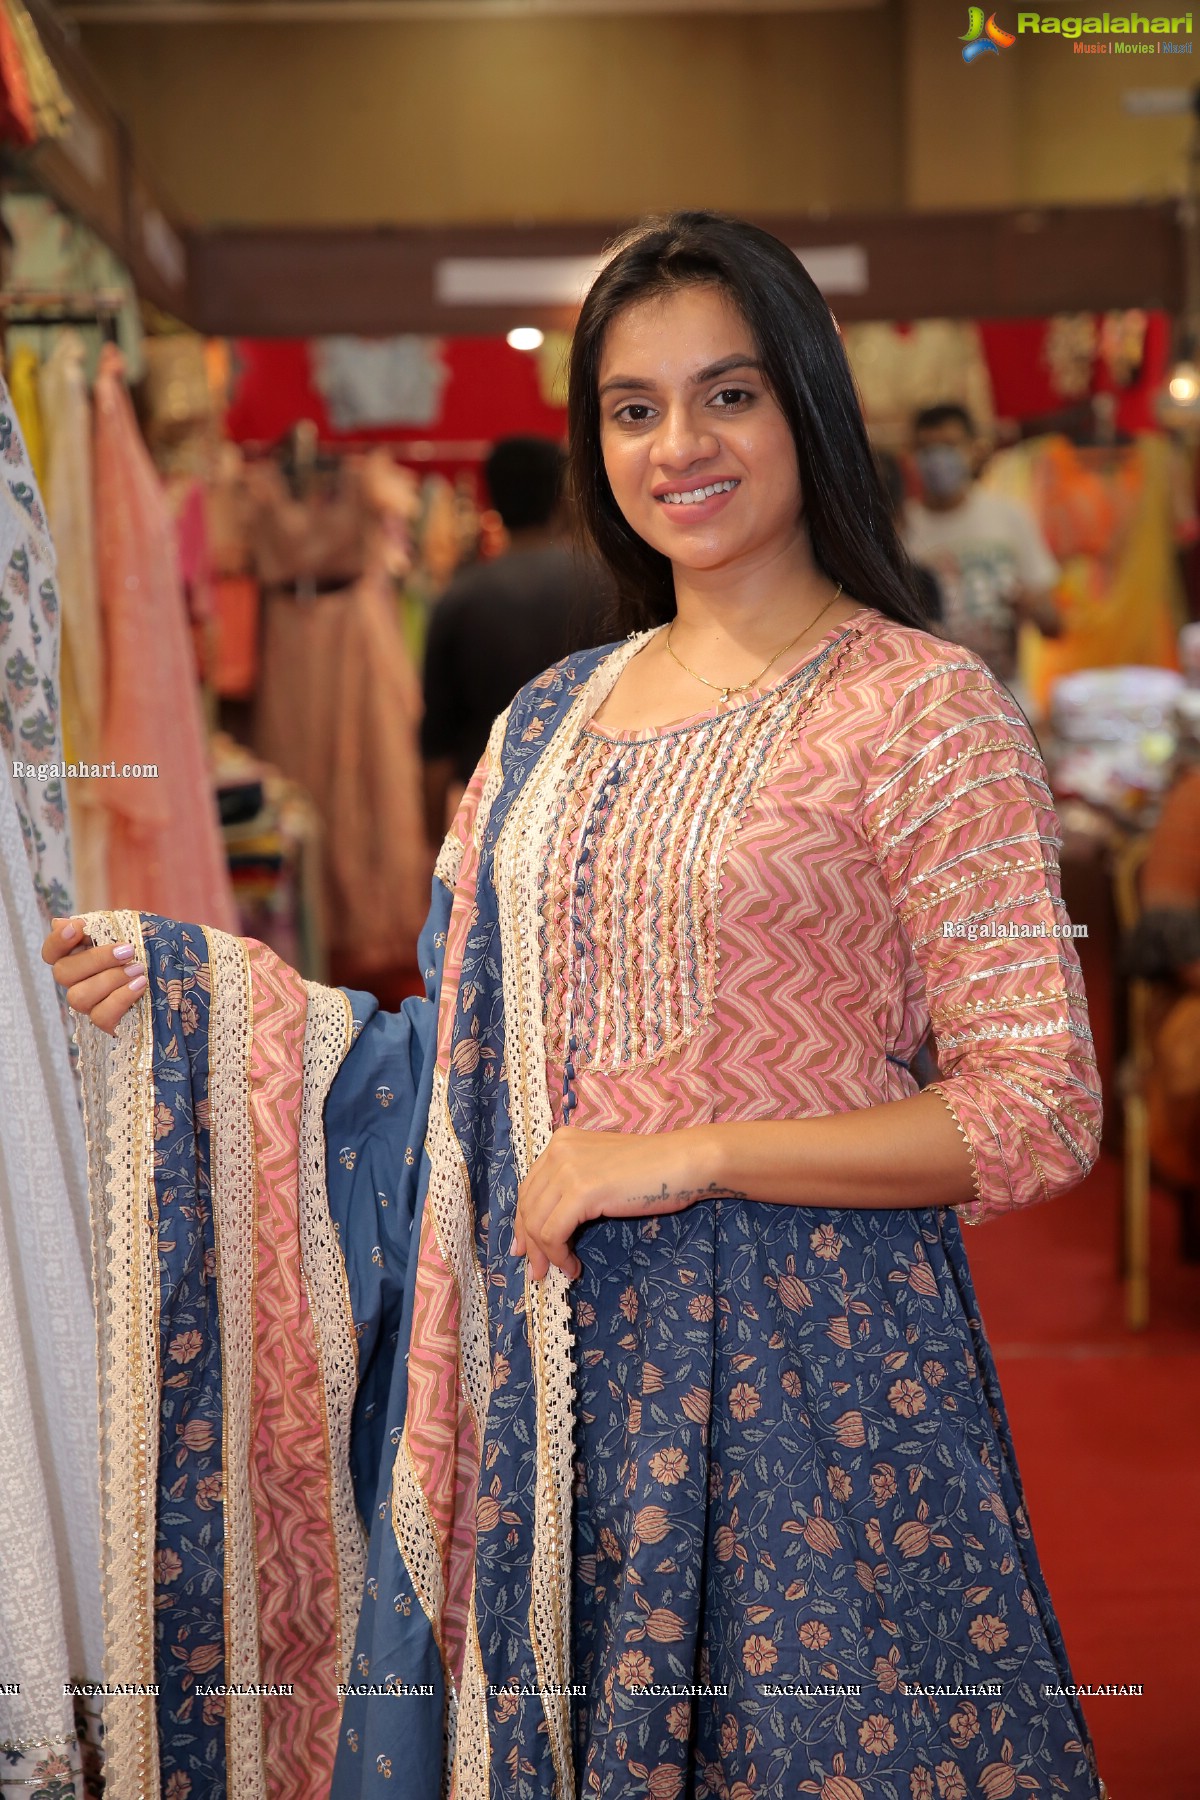 Sutraa Fashion & Lifestyle Exhibition August 2021 Begins at A Convention Centre, Vijayawada